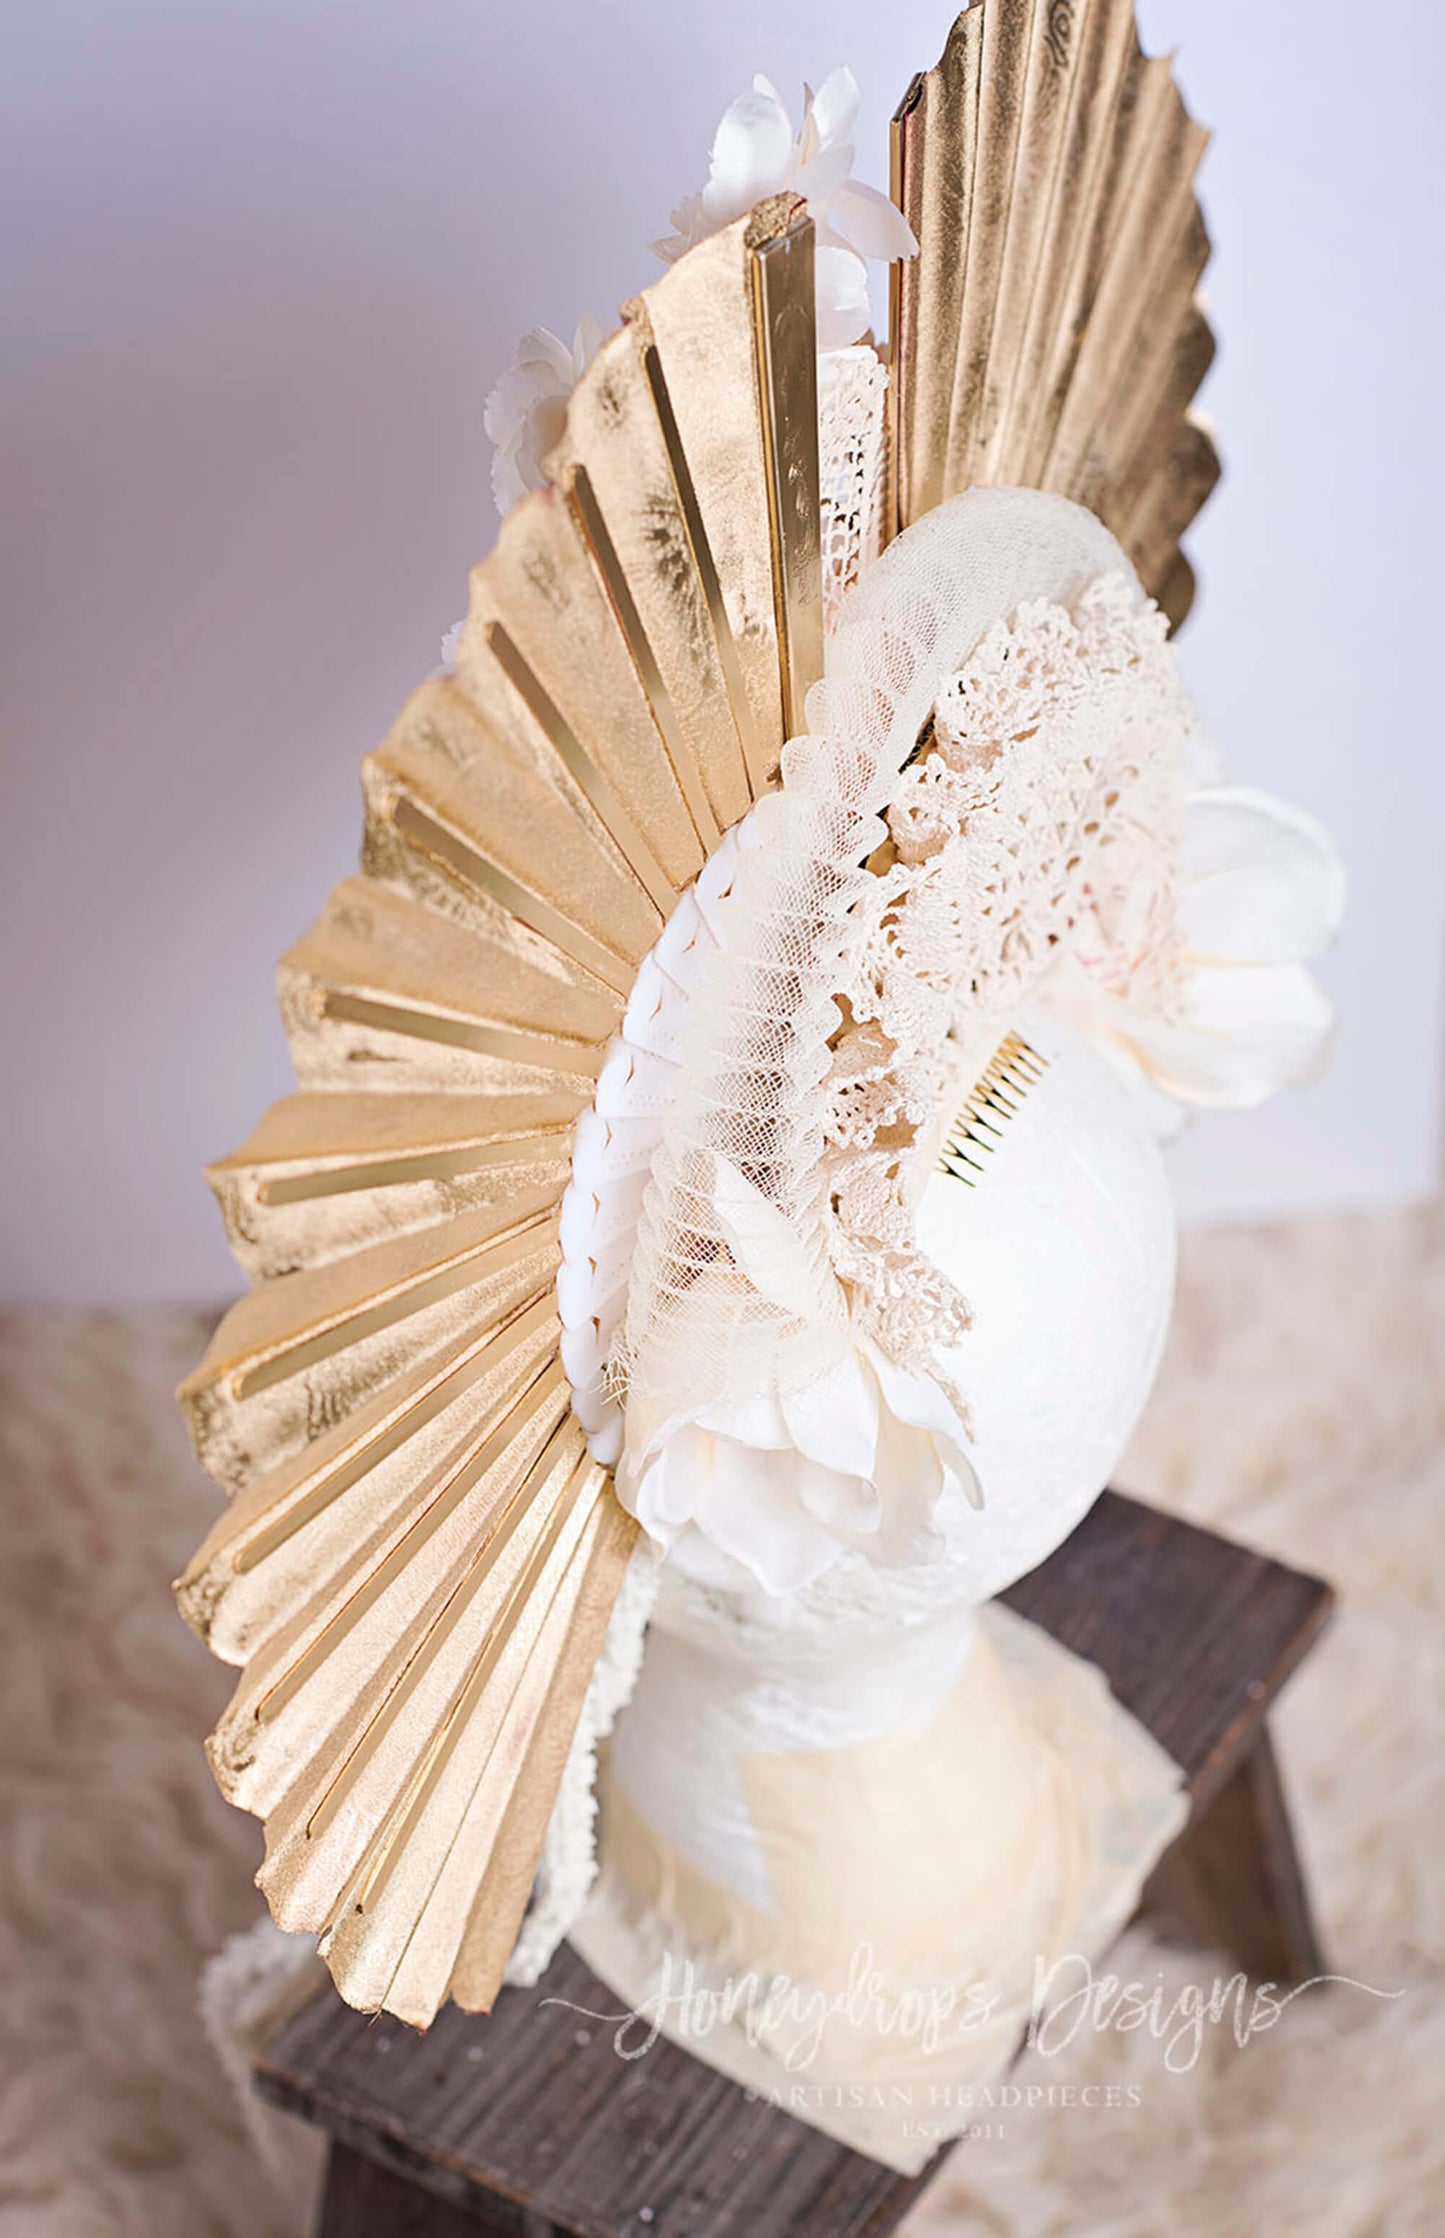 Empress of the Rose Couture Headpiece - Honeydrops Designs